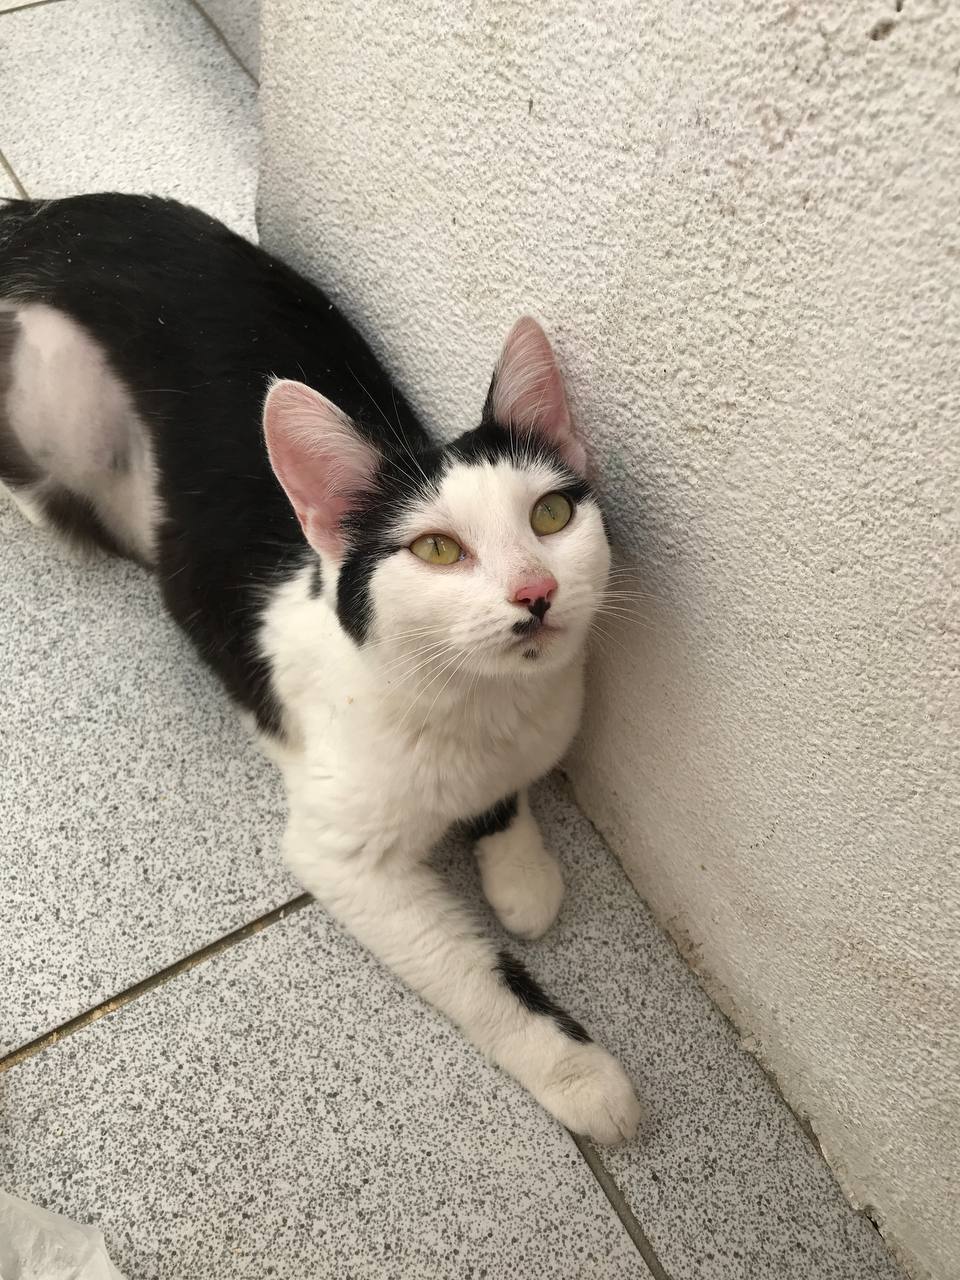 Found a cat, Moscow. Looking for a home or shelter - My, Lost, Homeless animals, In good hands, Helping animals, Animal Rescue, Animals, Pets, cat, Video, Vertical video, Longpost, The strength of the Peekaboo, Found a cat, Overexposure, No rating